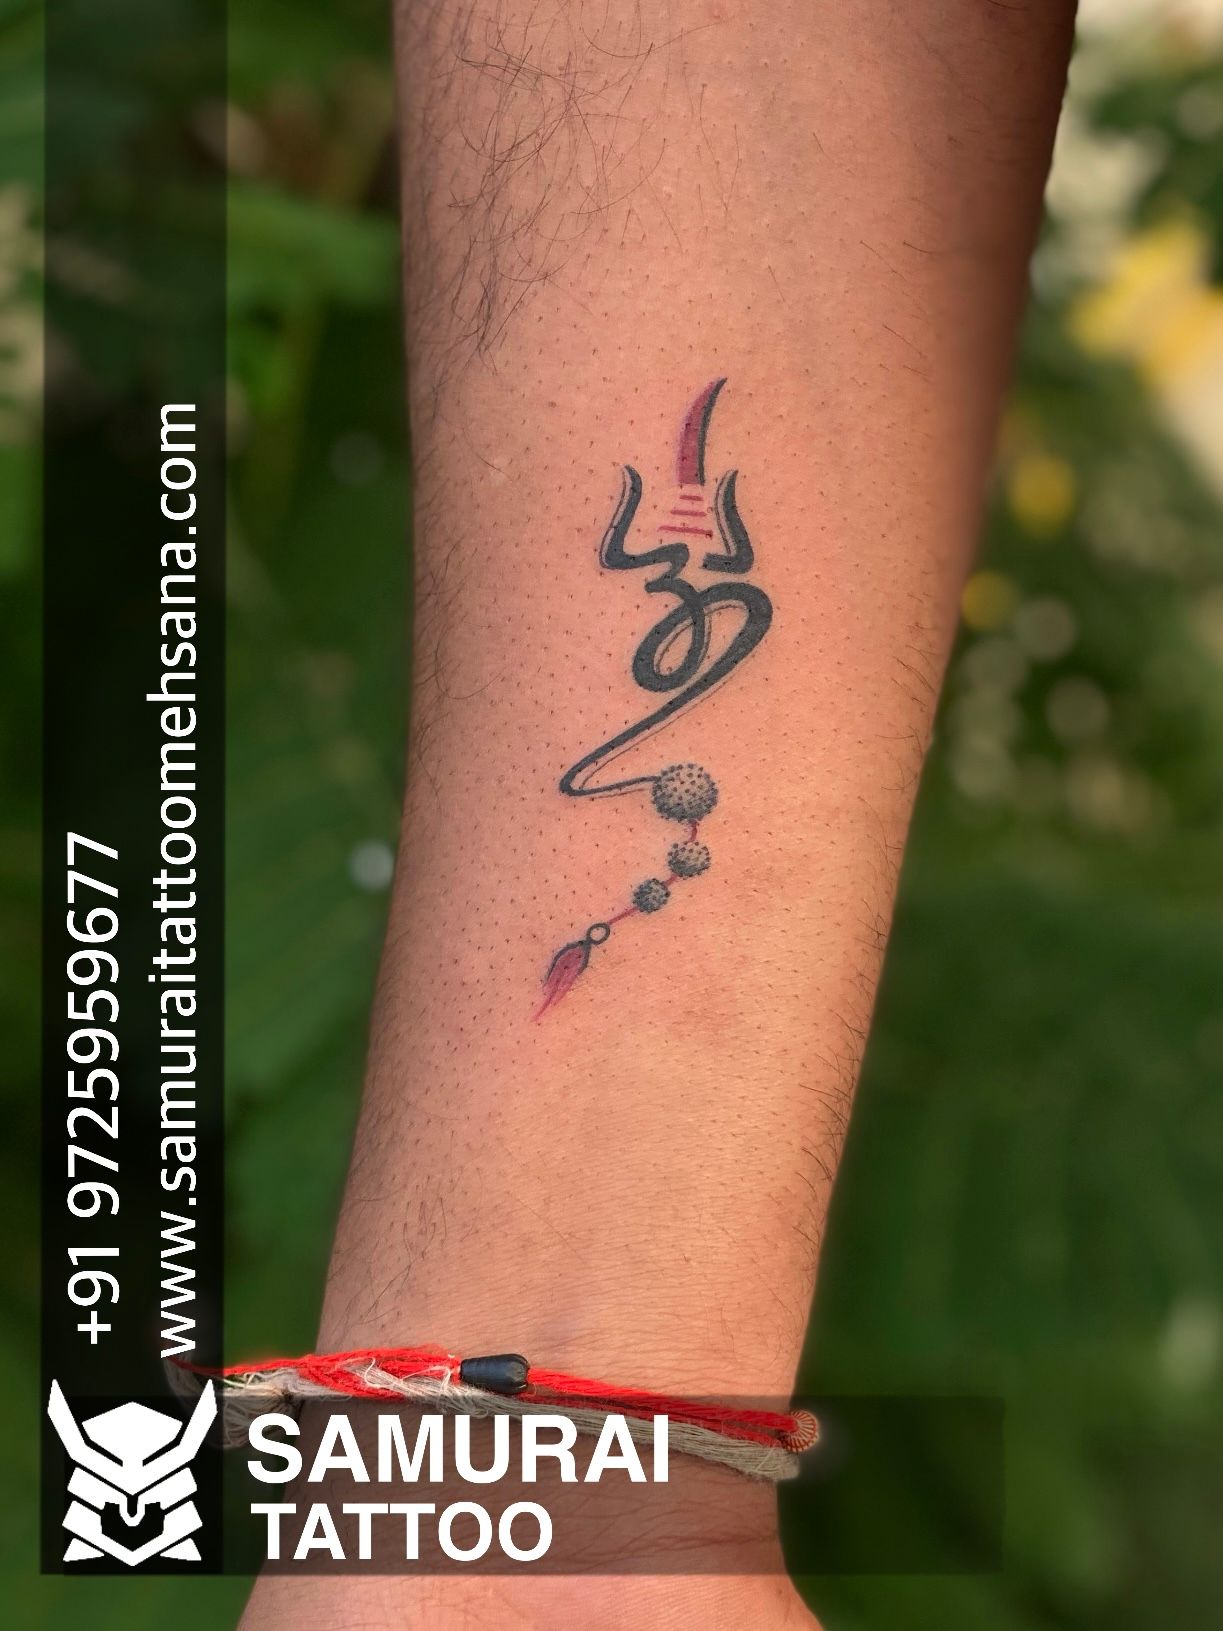 Nivetha Pethuraj meets die-hard fan who has a tattoo of her name